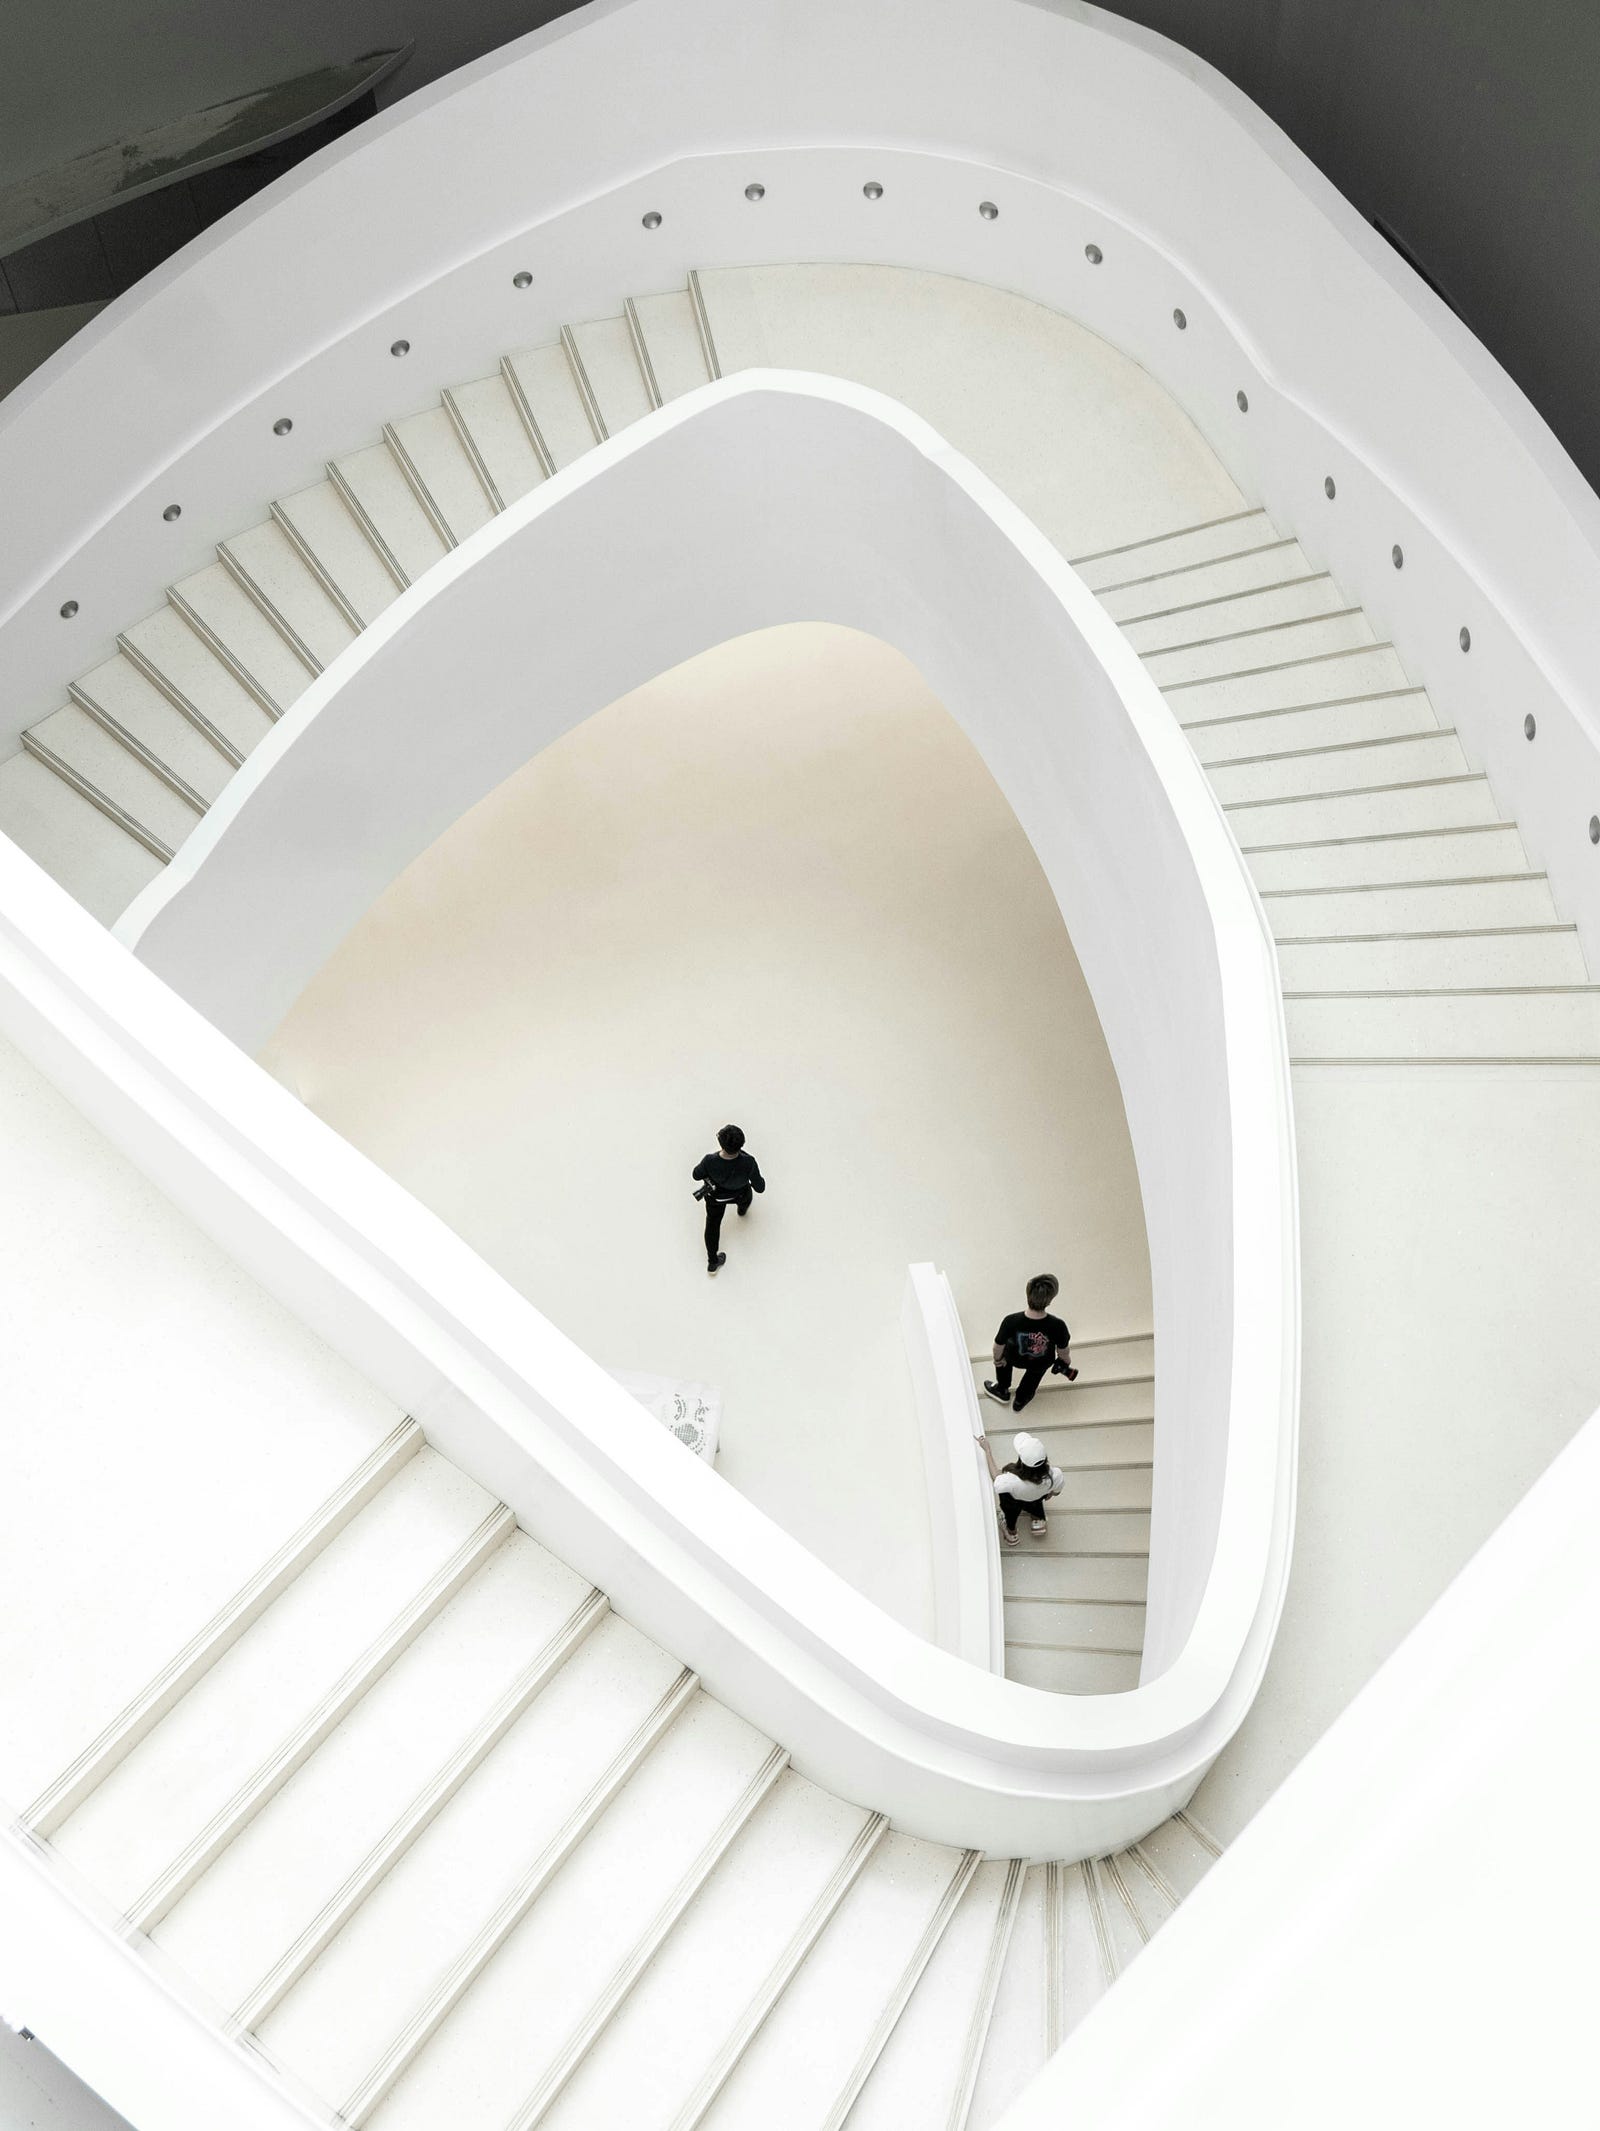 An overhead view of winding white stairs, with three individuals walking below. Exercise snacks (such as taking the stairs instead of an elevator) can help with weight maintenance.